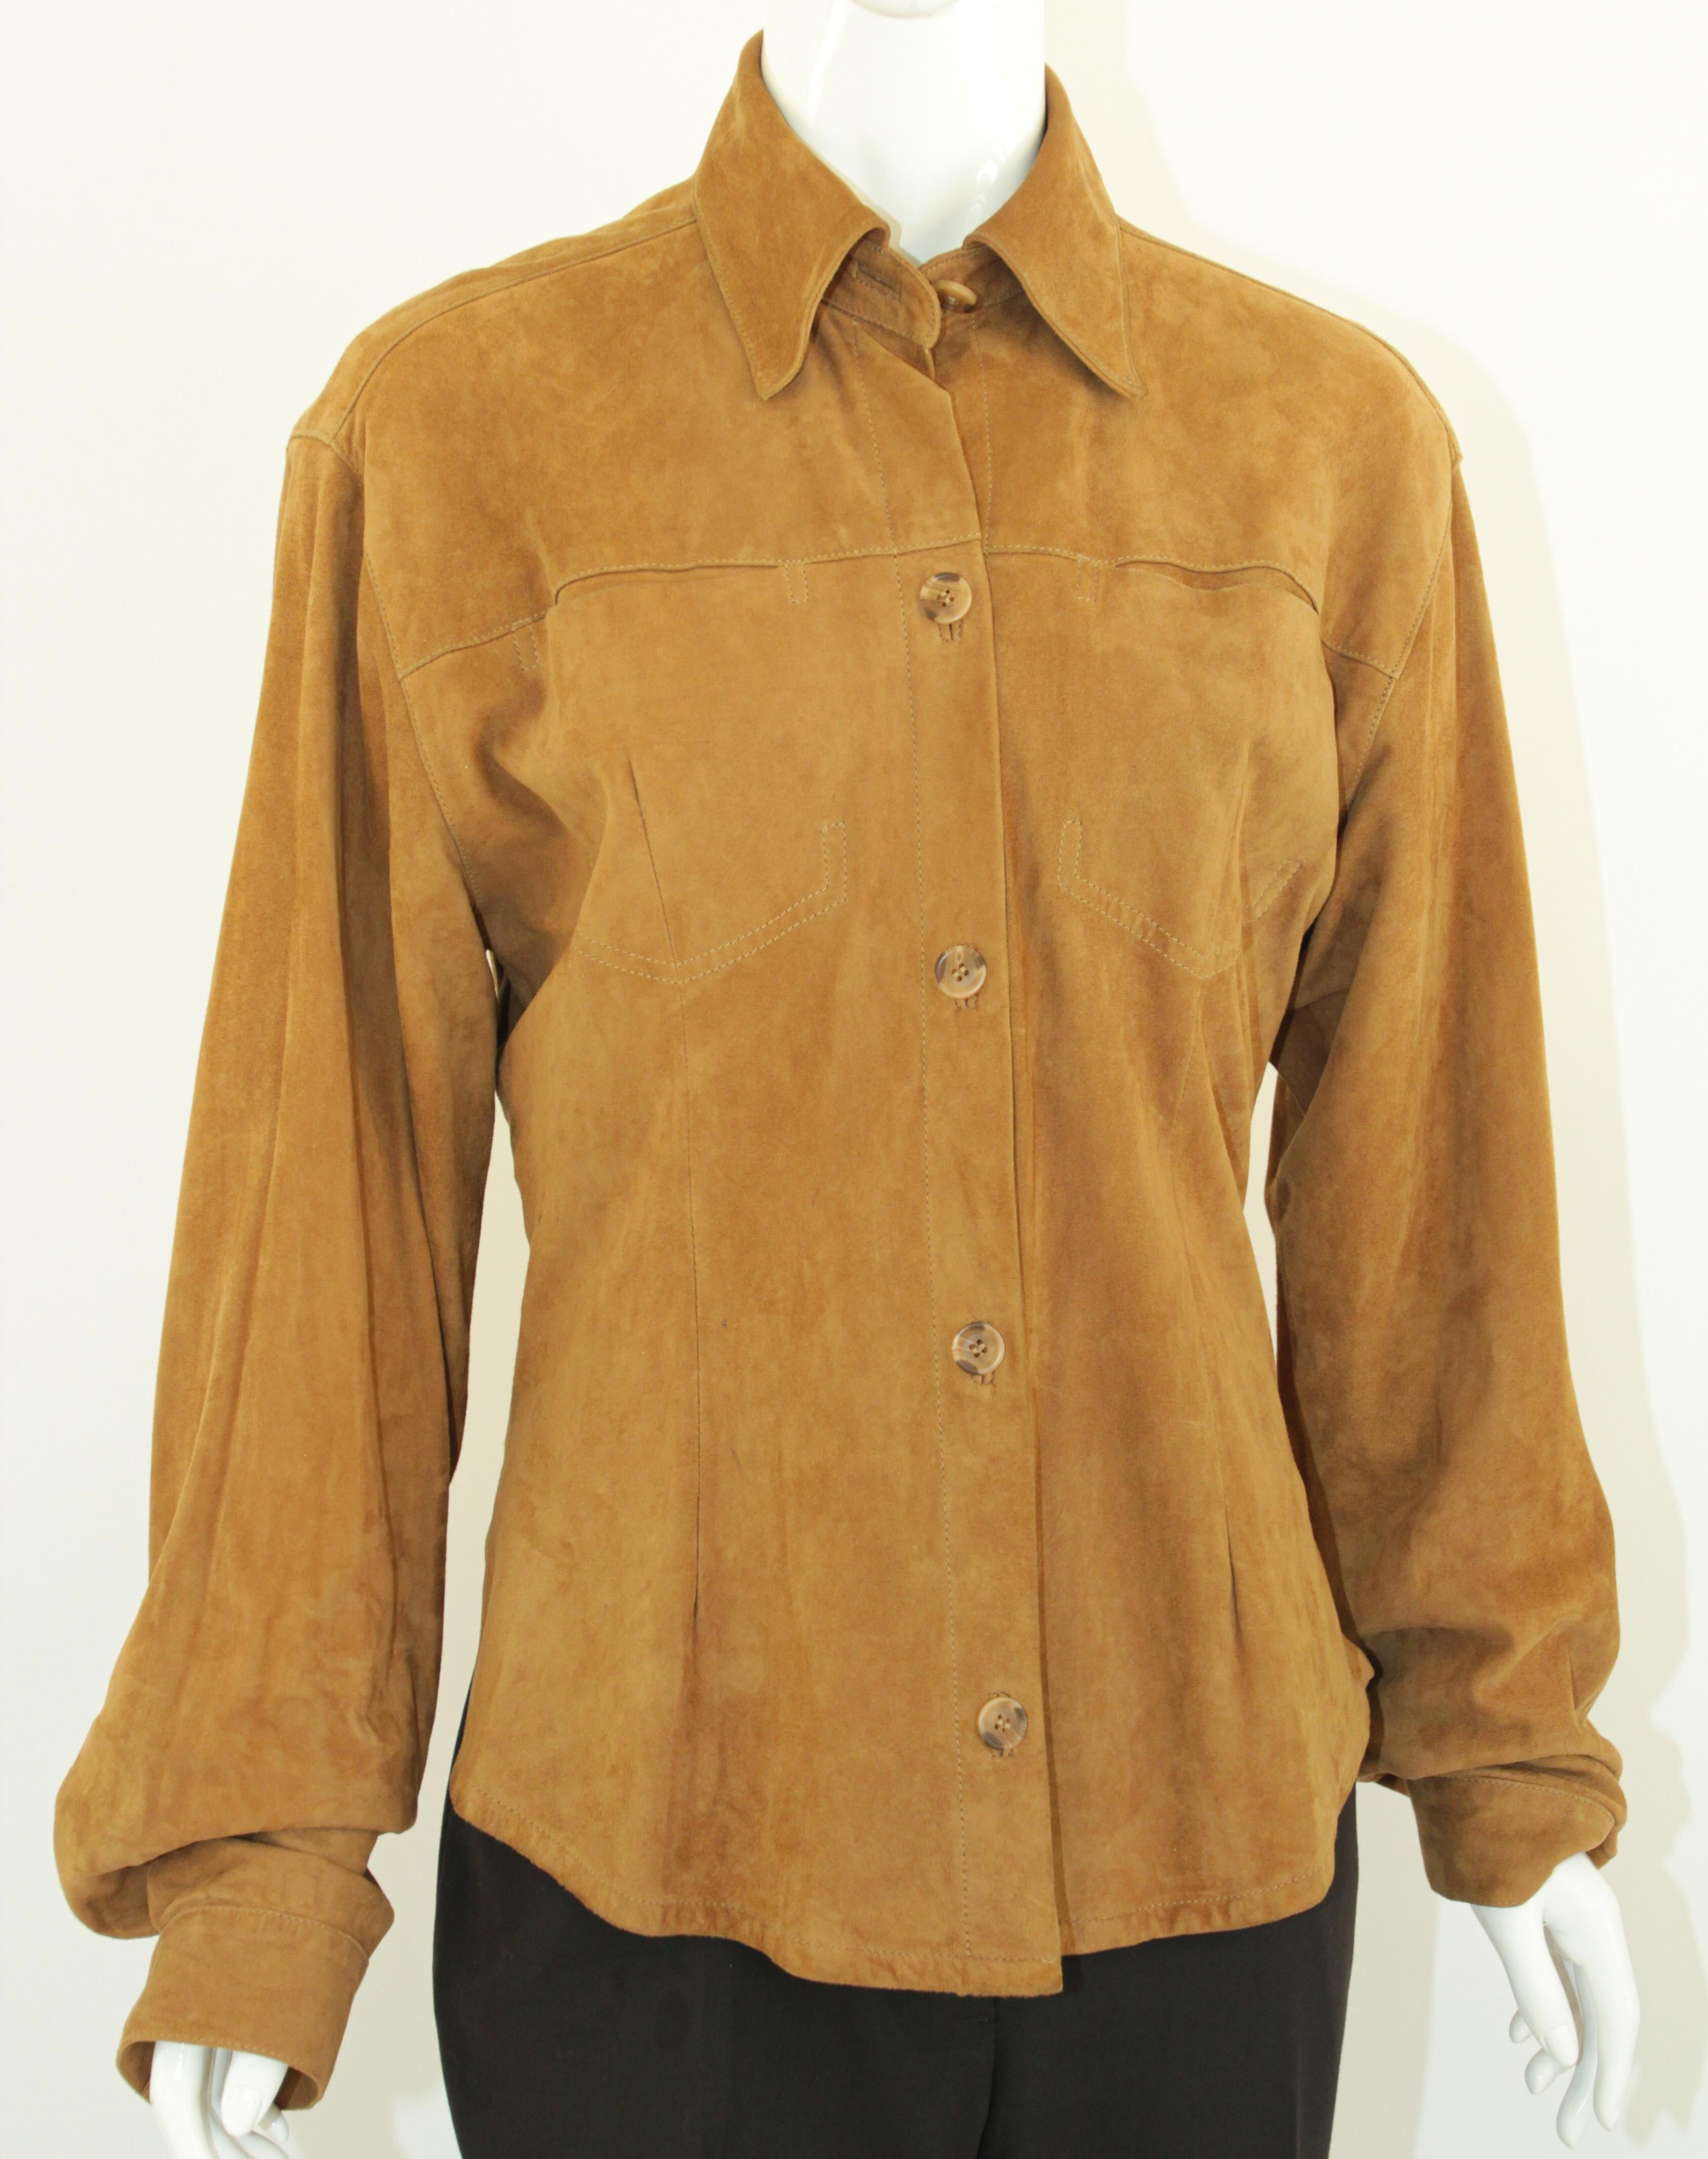 Vintage suede shirt jacket light brown.
Women camel suede shirt jacket.
Vintage brown suede shirt blouse real leather.
Suede shirt jacket, button front, collar, chest pockets, stitching, lined interior, buttoned cuffs. 
Size: 14
Slim fit.
Dimensions